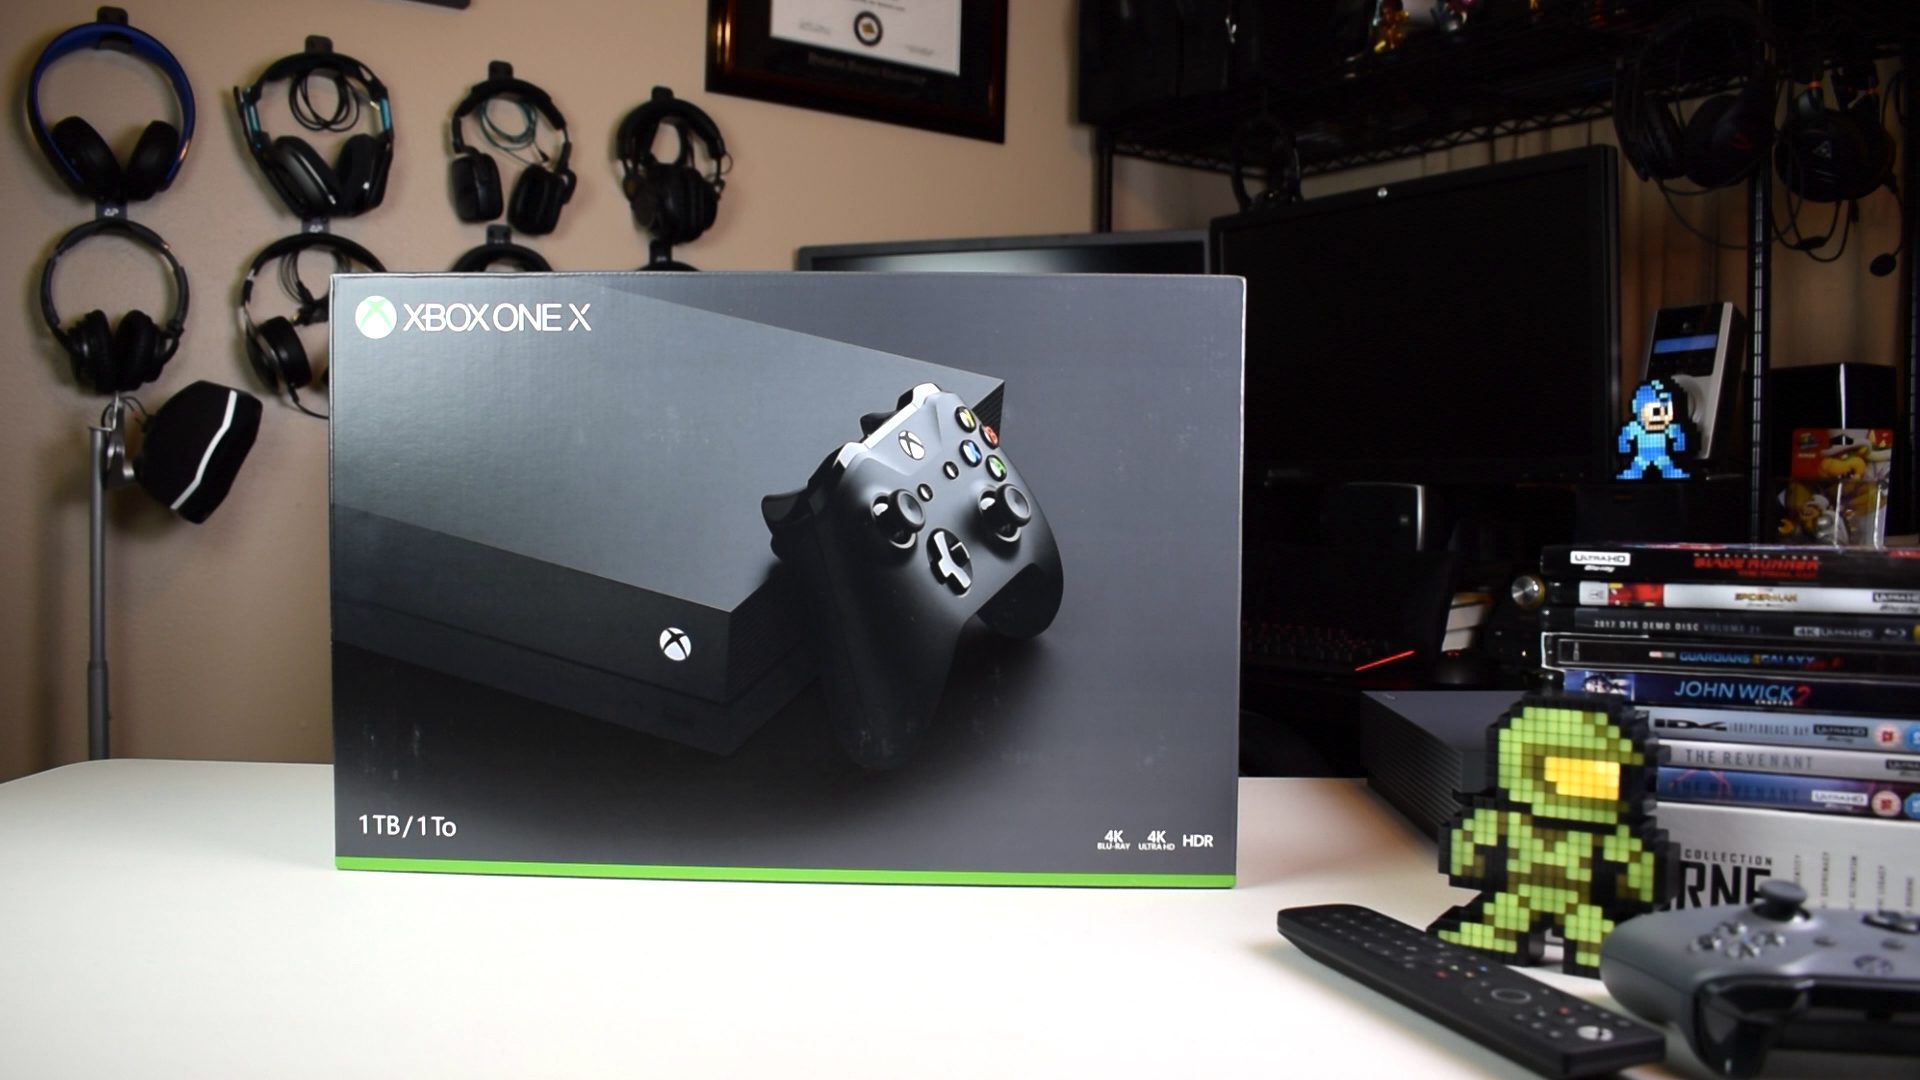 Xbox One X review consumer box standard Xbox One X